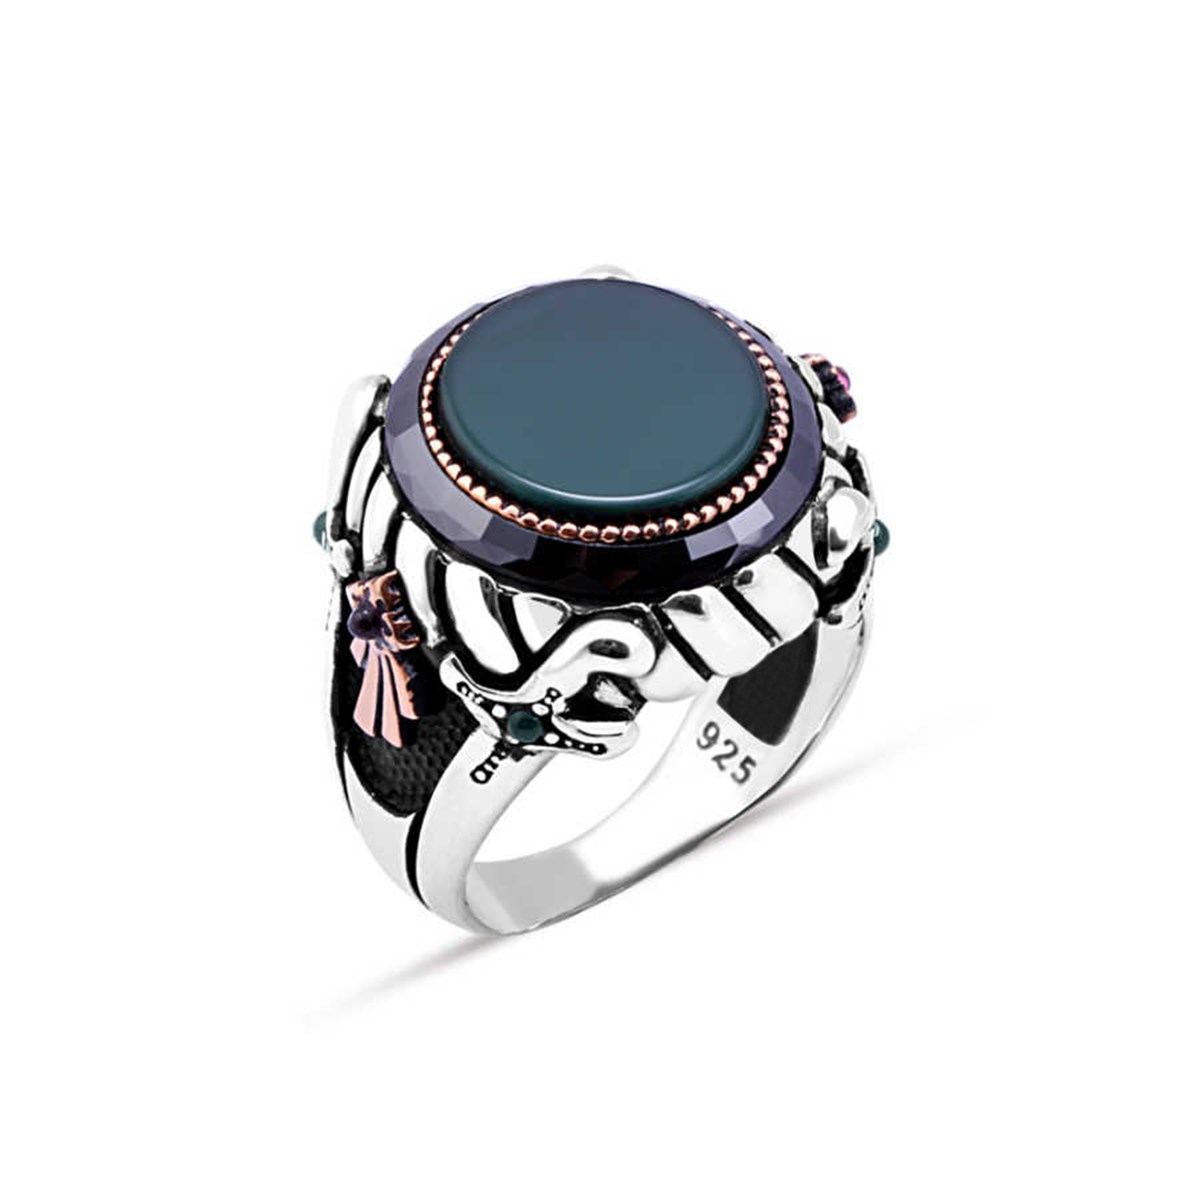 Sterling Silver Men's Ring with Green Agate Stone in the Middle and Circle Stone